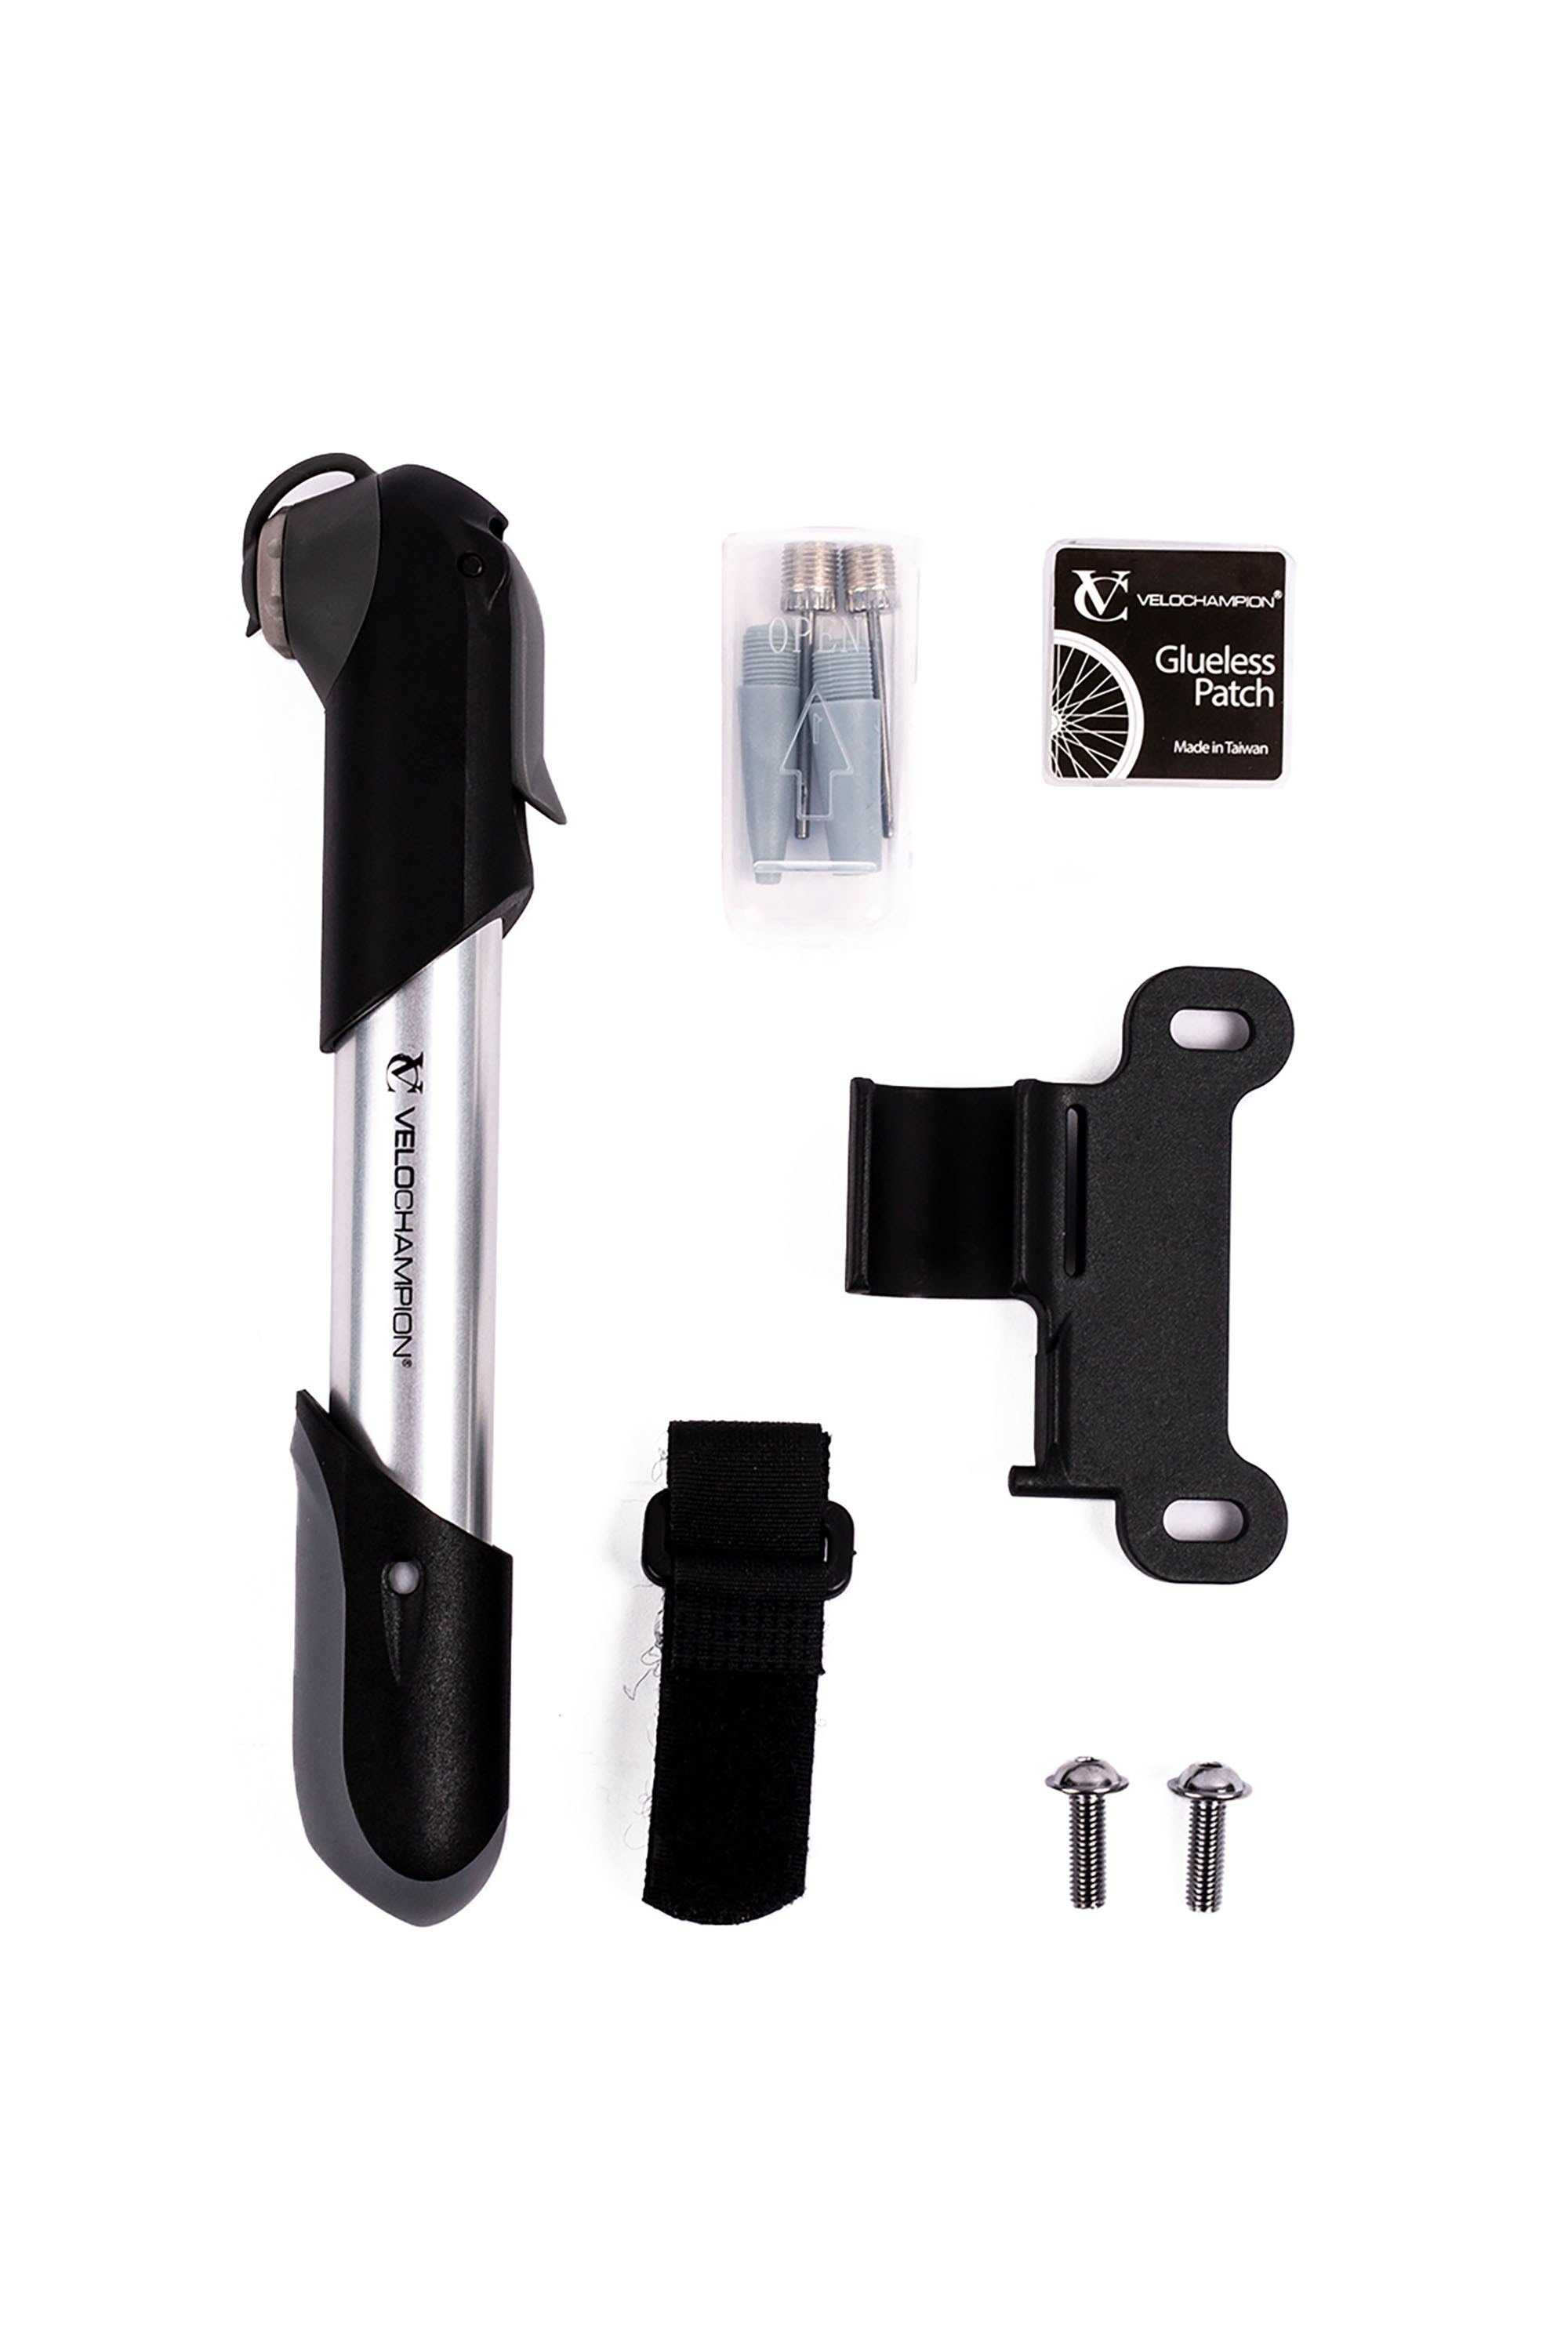 Alloy 7" Mini Bike Pump with 6 Repair Patches -